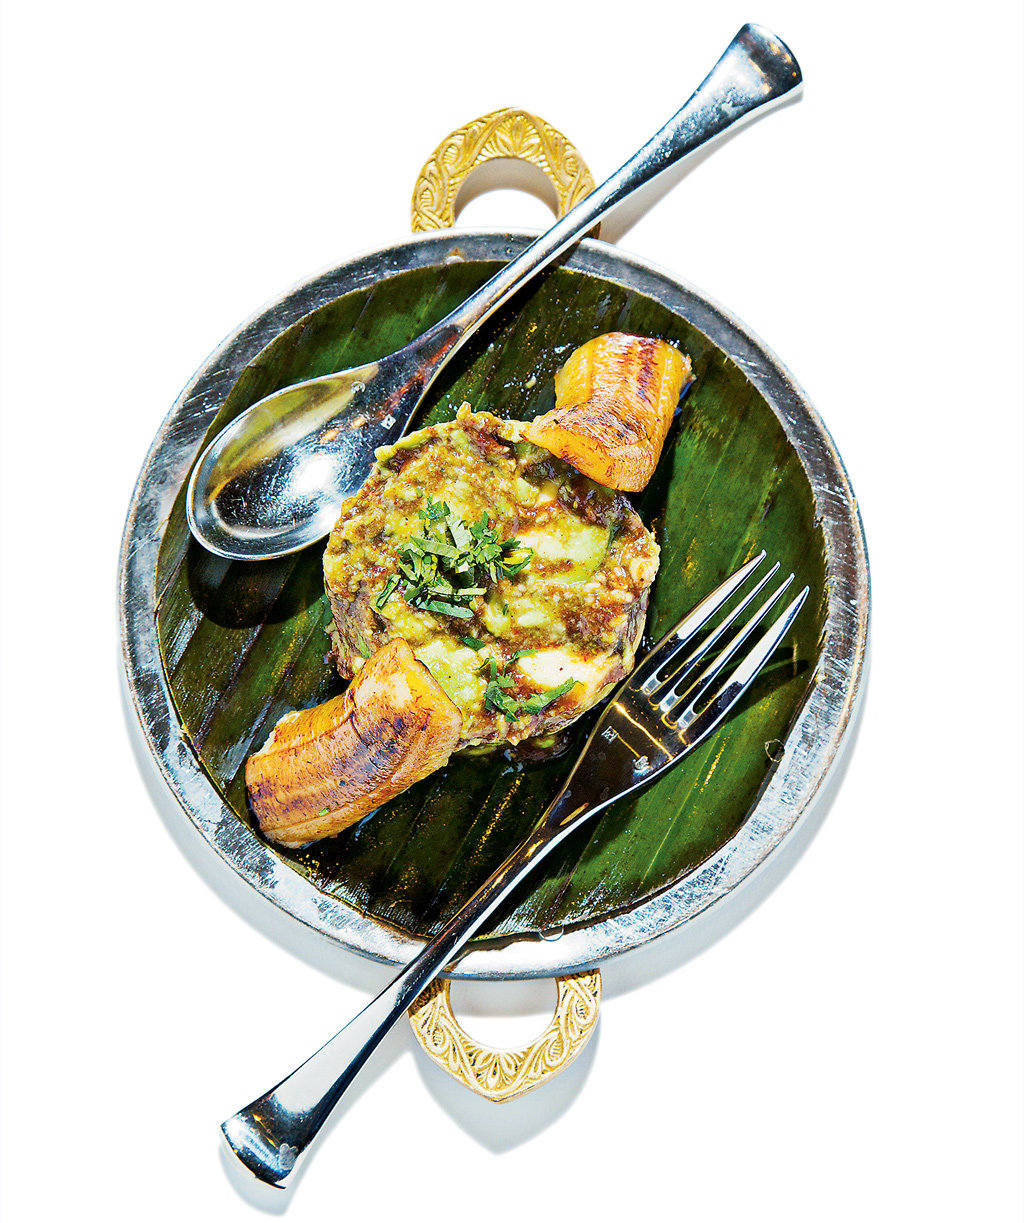 great places to eat around penn quarter. At Rasika West End, try the avocado-banana chaat. Photo by Scott Suchman.